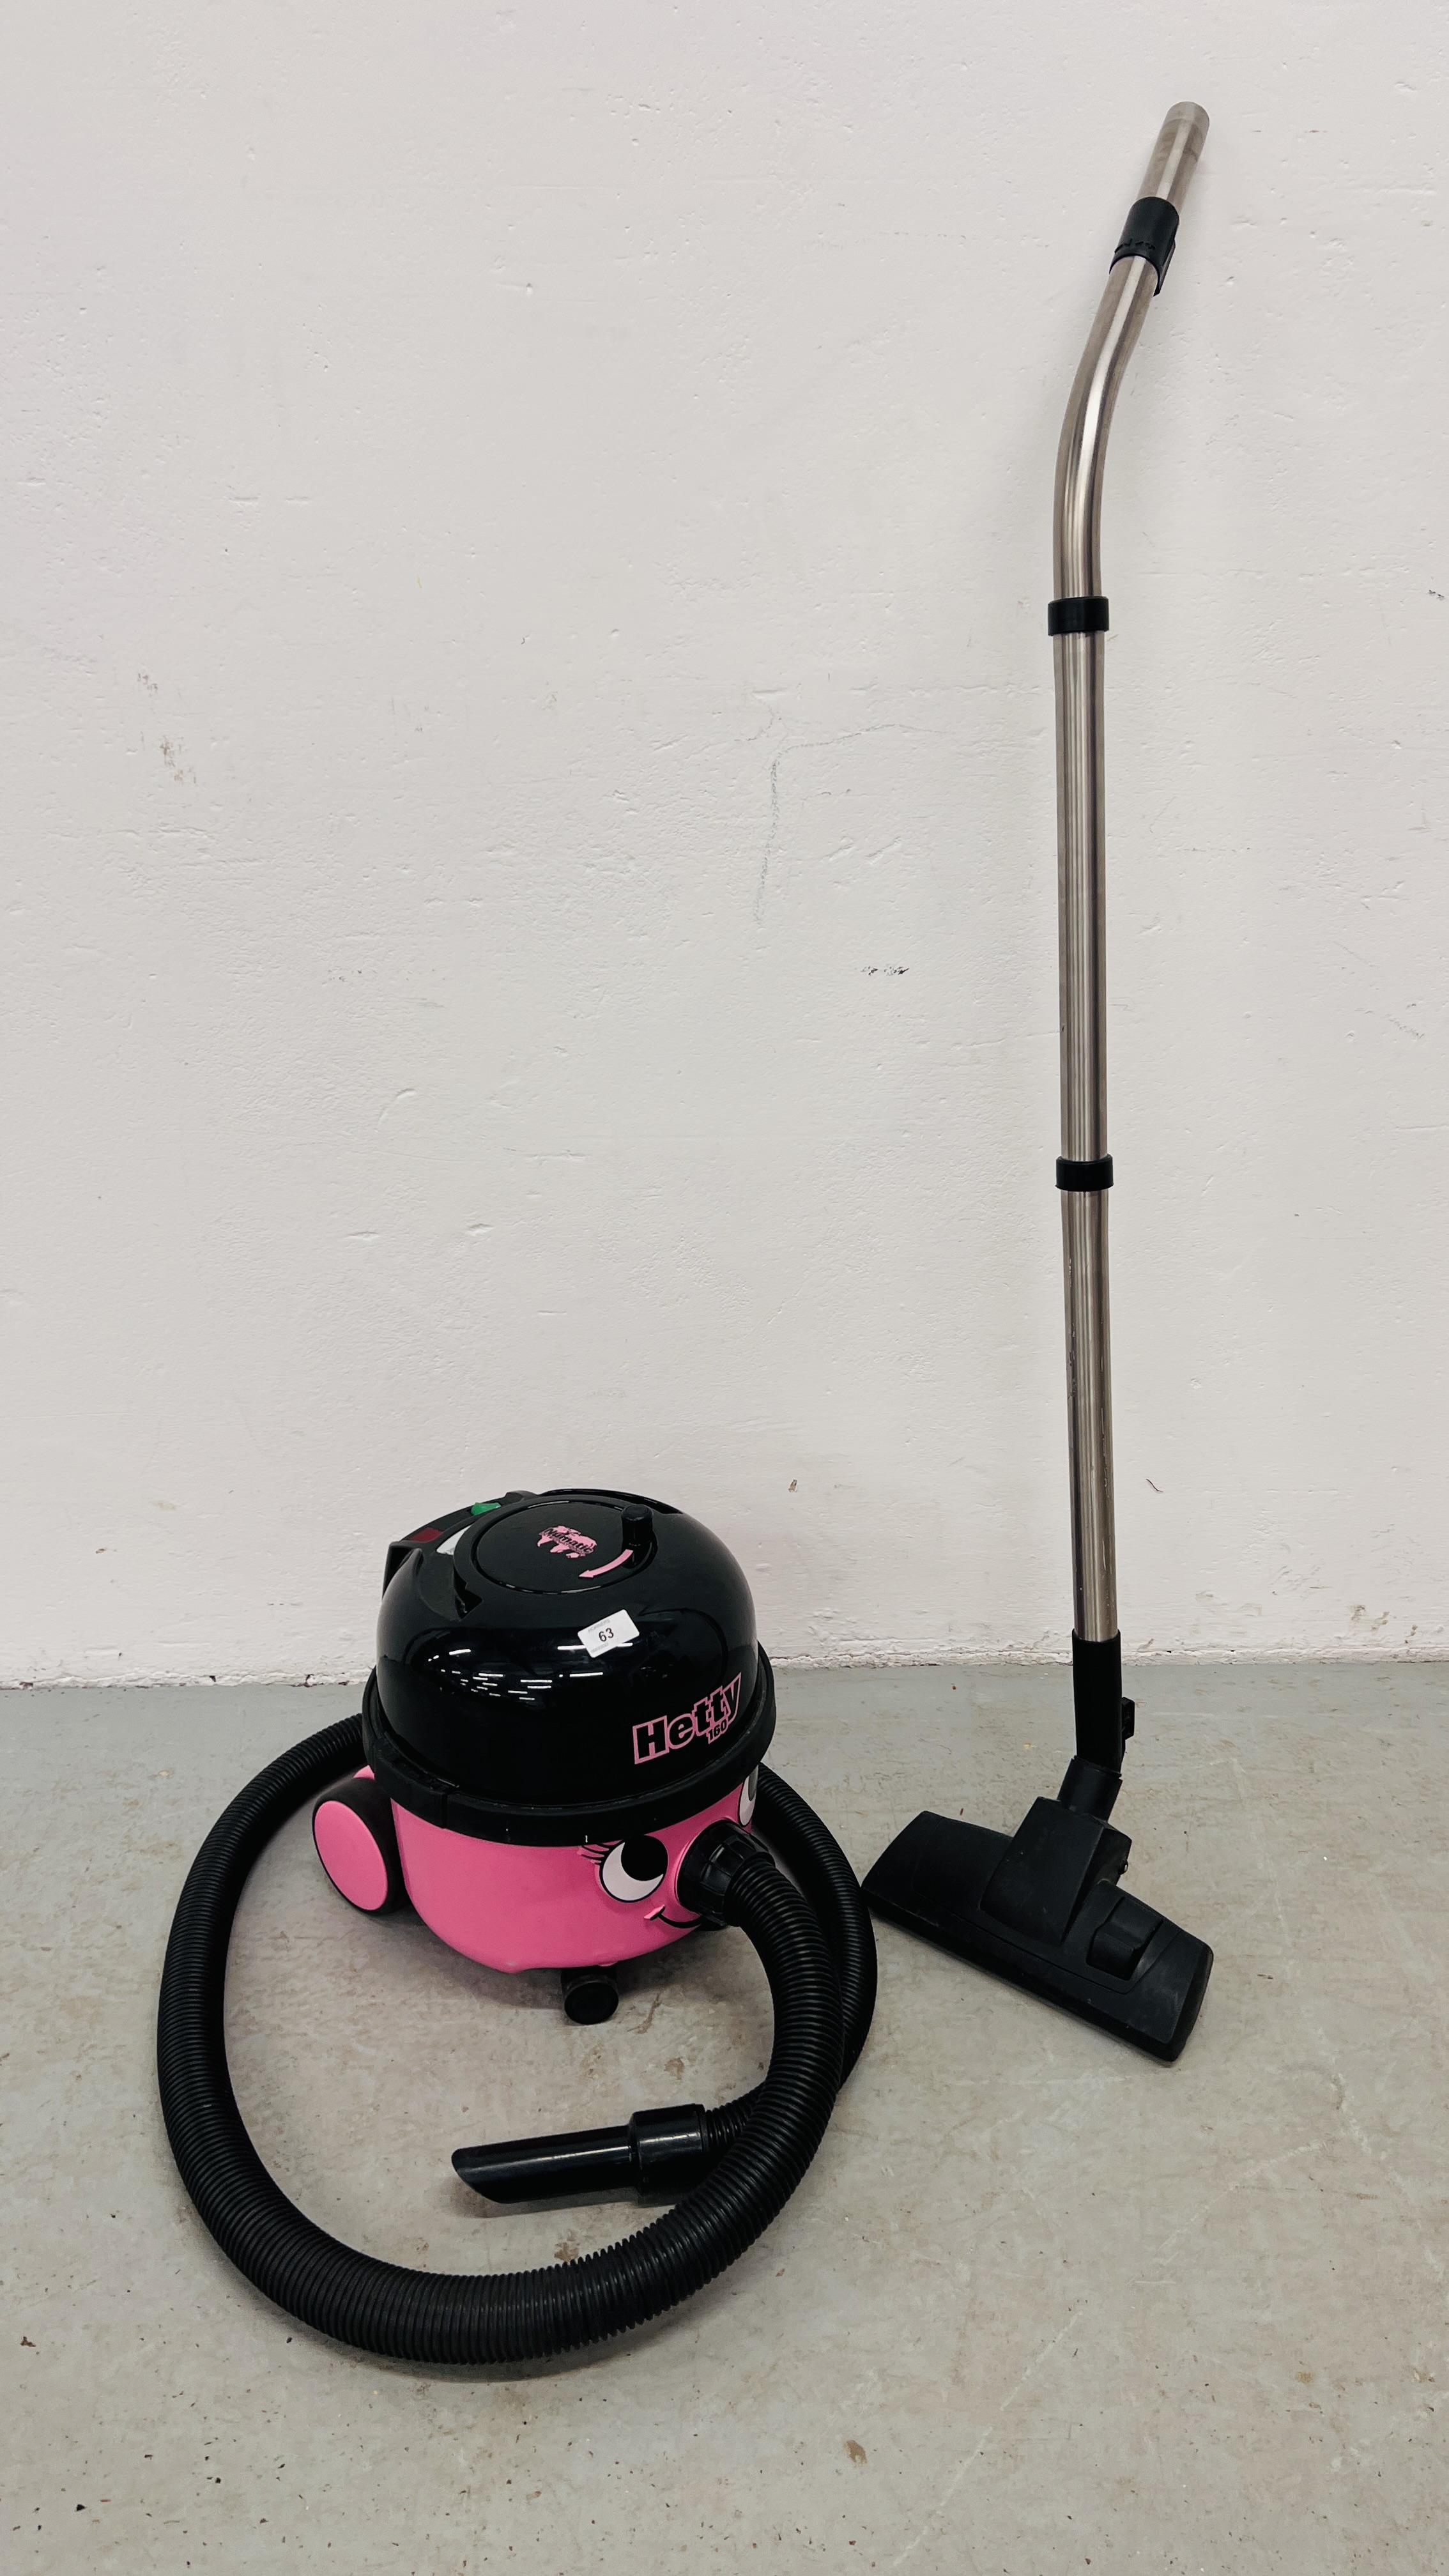 A NUMATIC HETTY 160 VACUUM CLEANER - SOLD AS SEEN